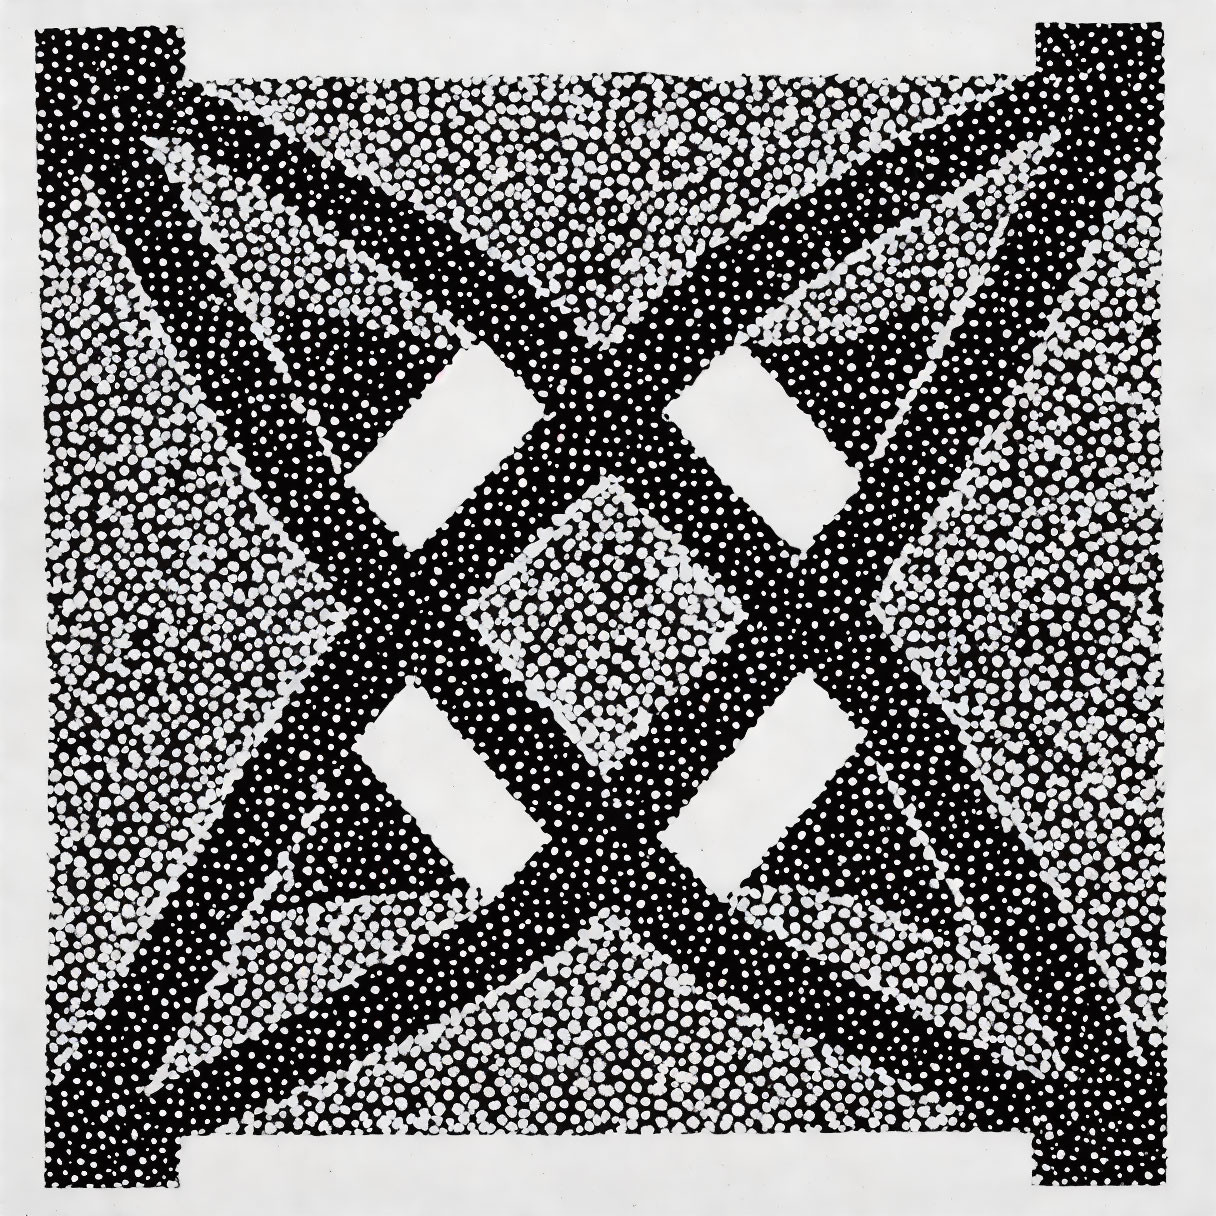 Abstract Black and White Symmetrical Pattern with Overlapping Lines and Dotted Textures